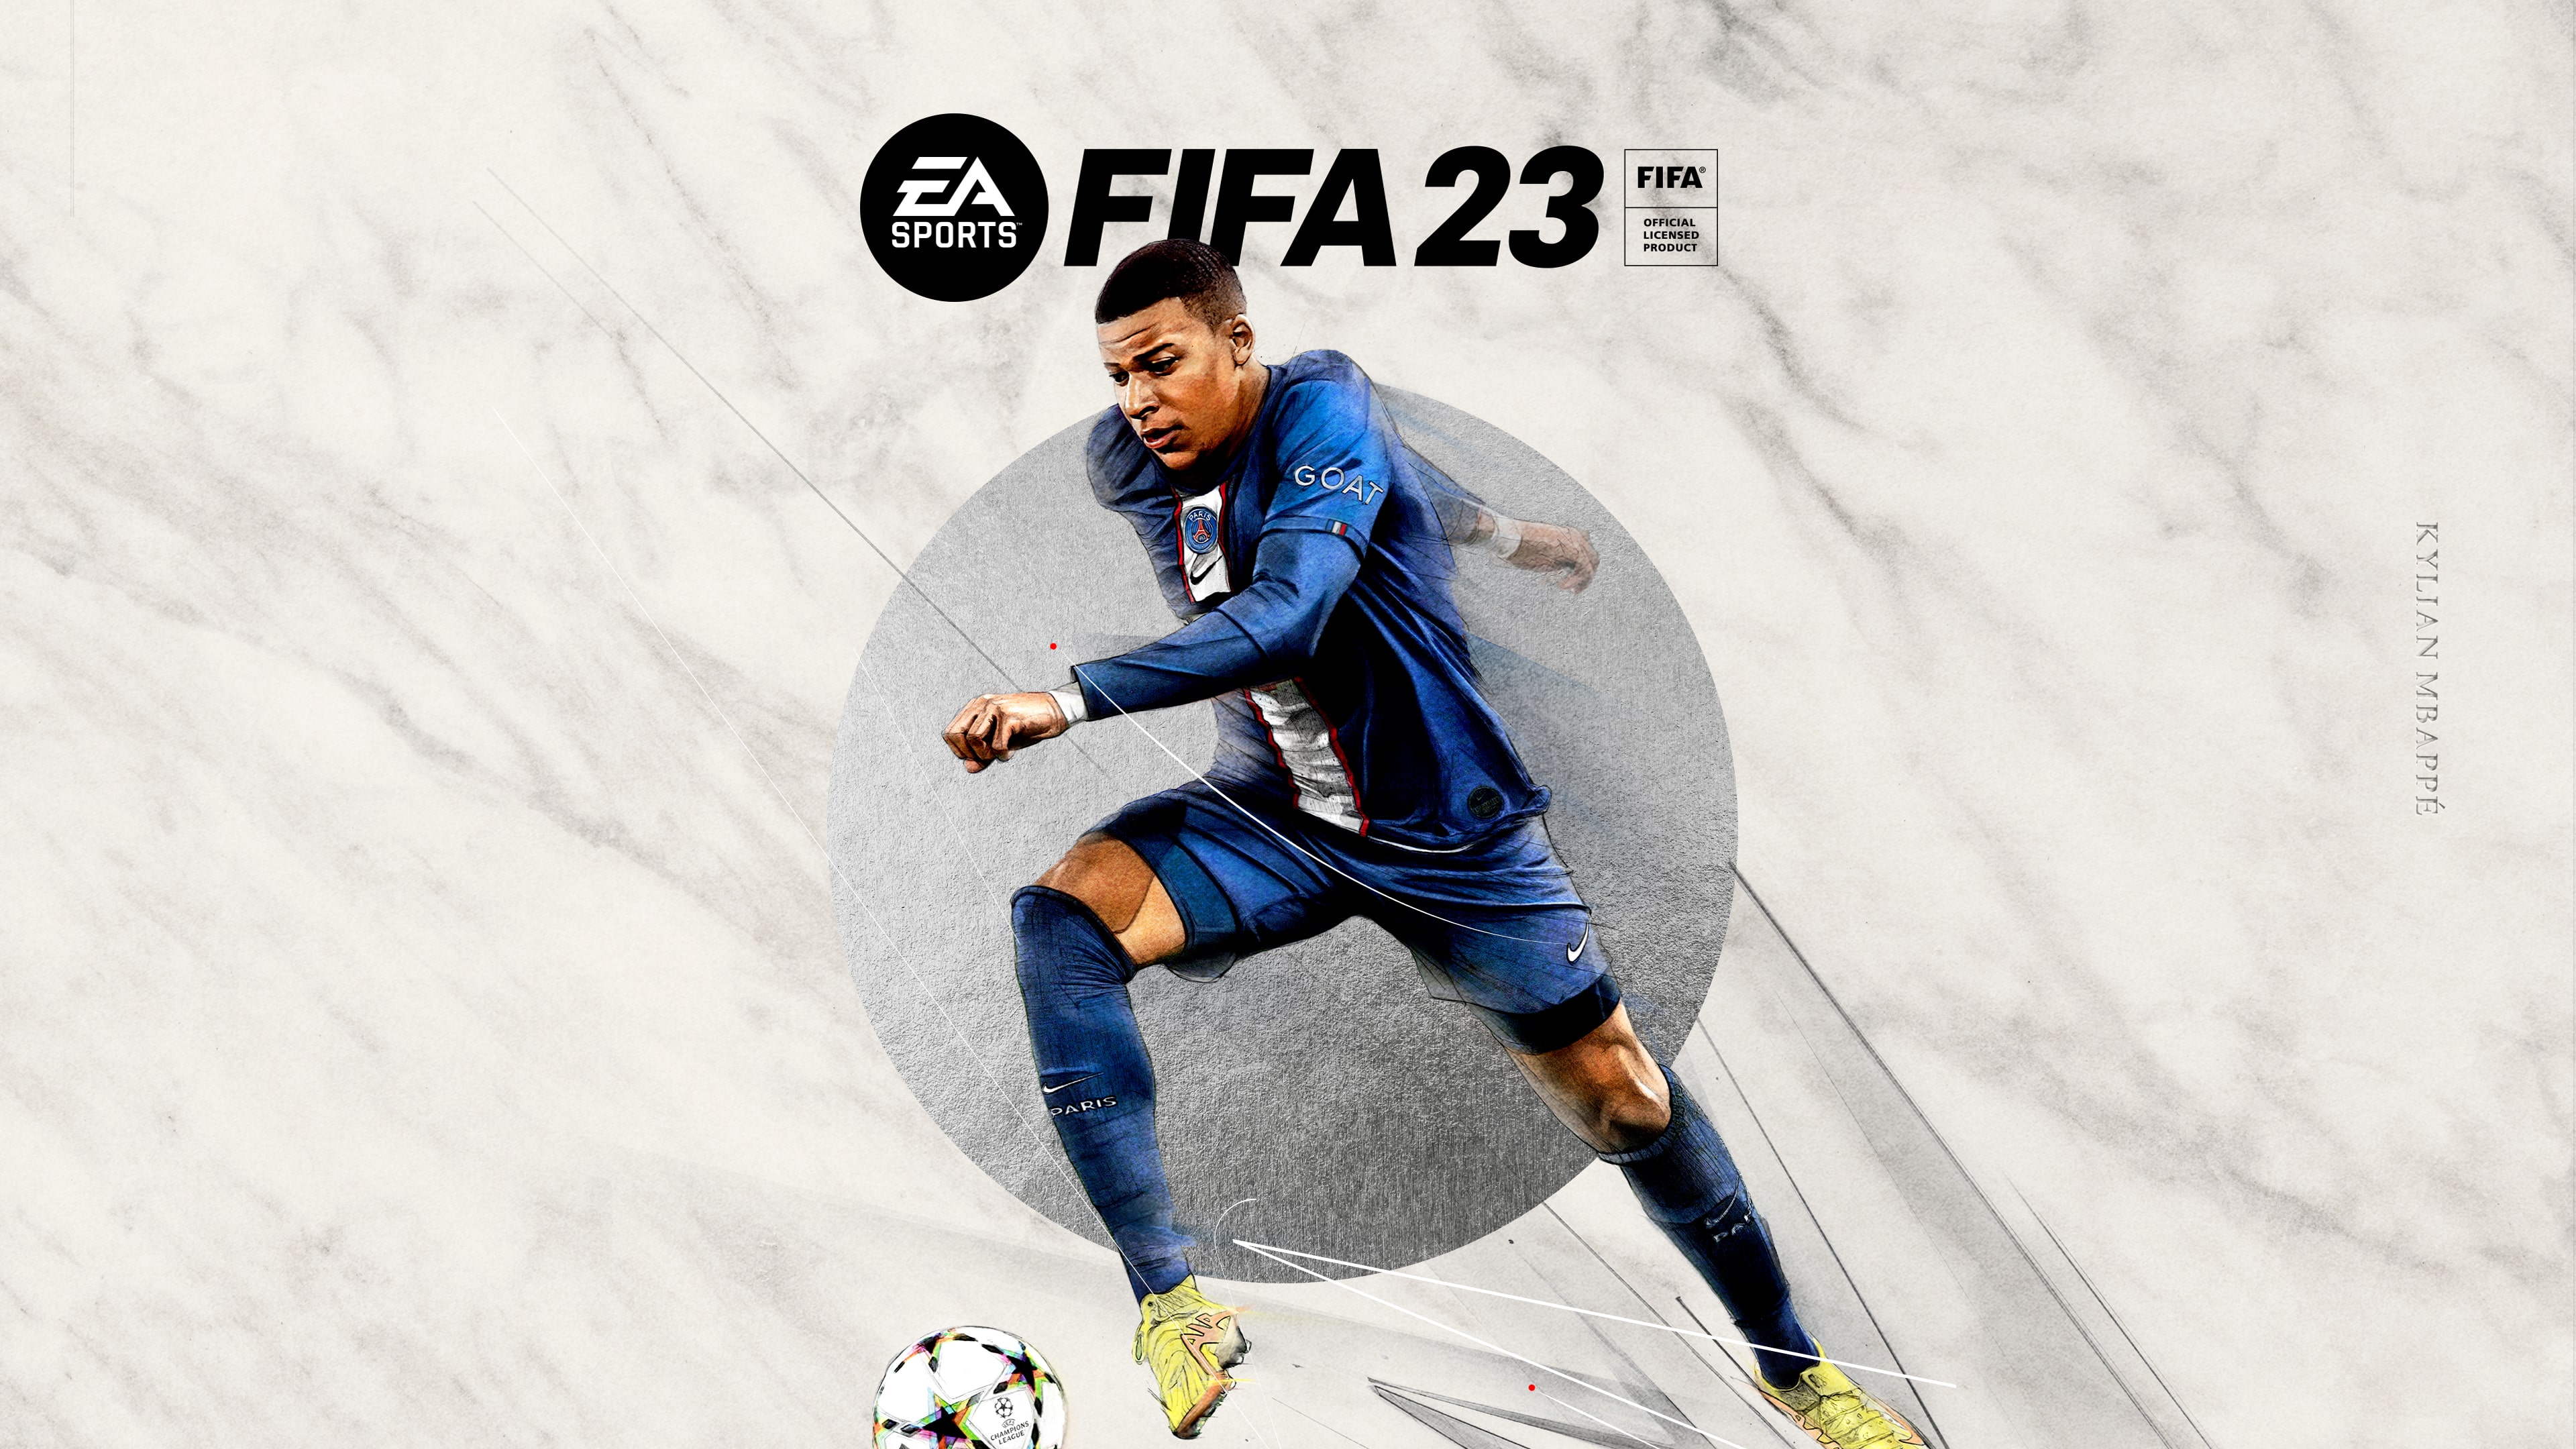 Ea Play Games 2023 - All Computer Games Free Download 2023